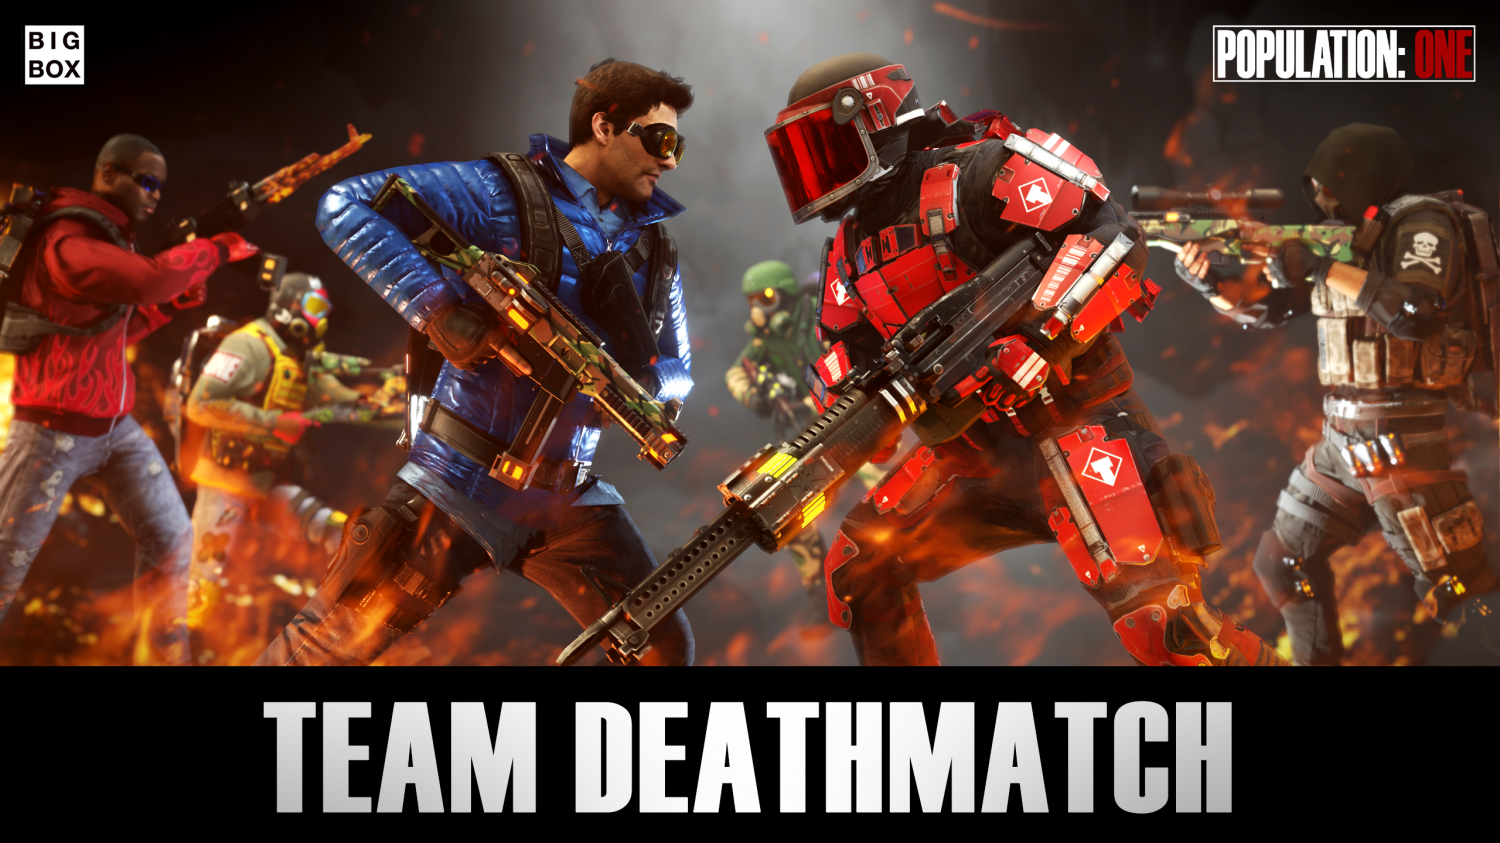 Population One Deathmatch mode is a limited time event starting this